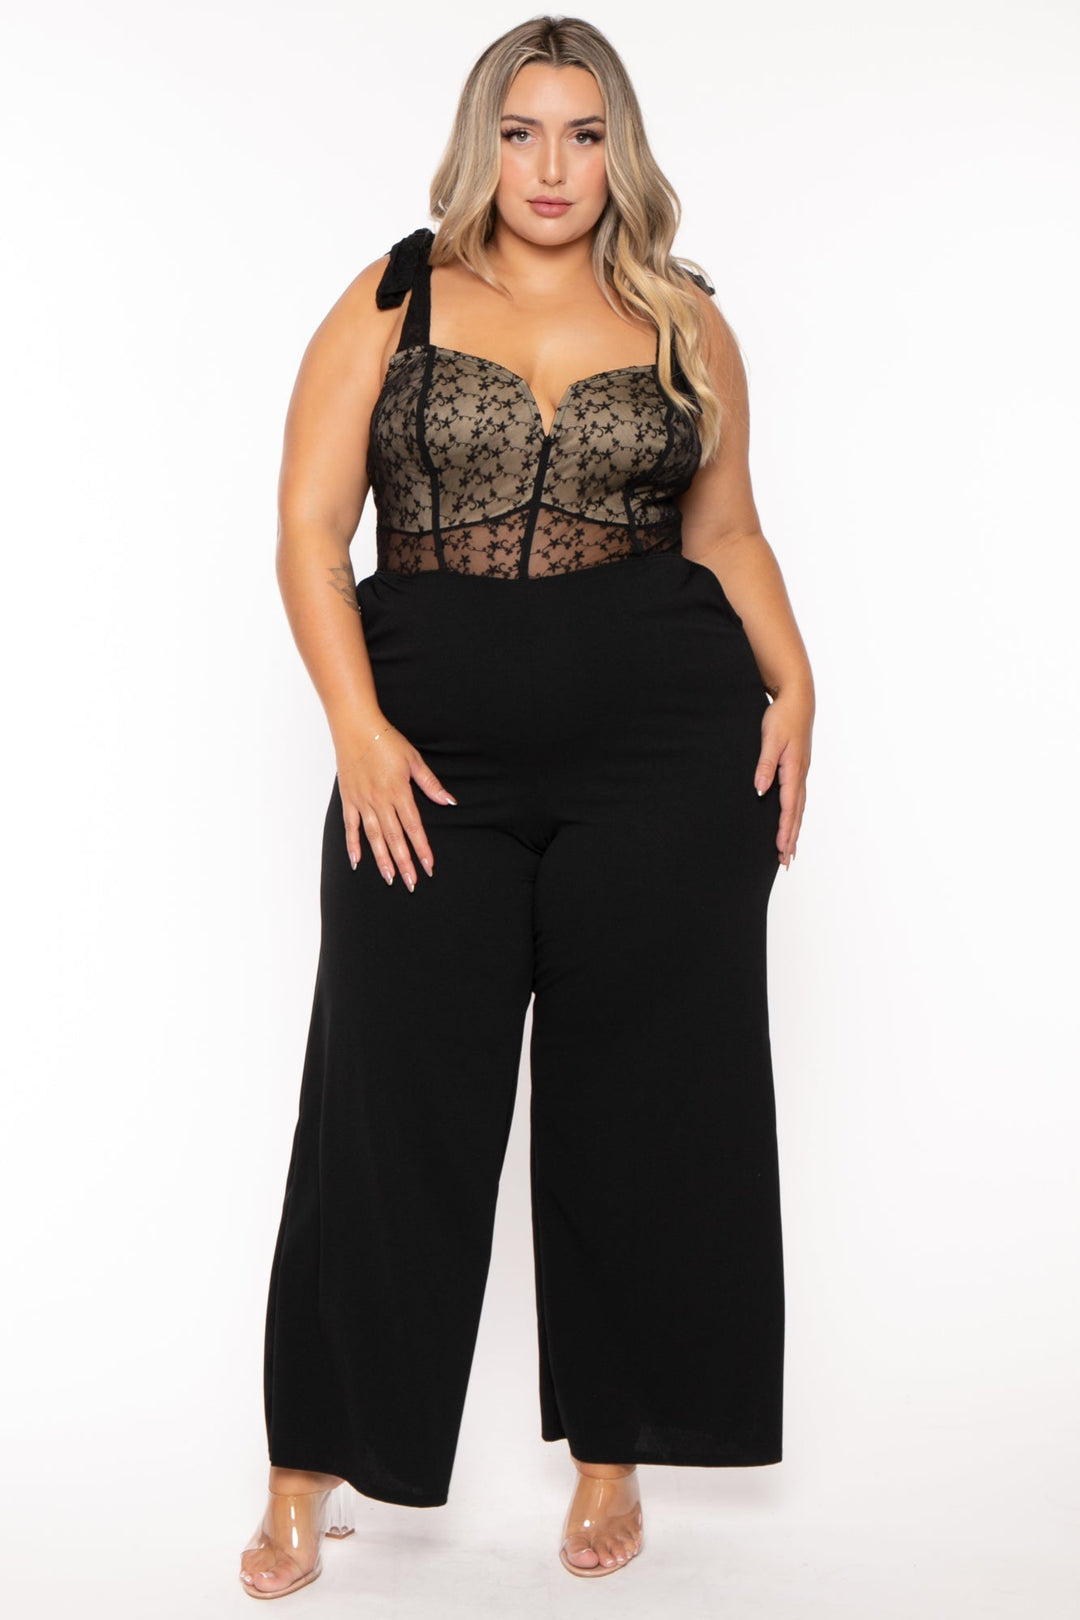 Plus Size Bodysuit with button crotch in Black – Esme and Elodie